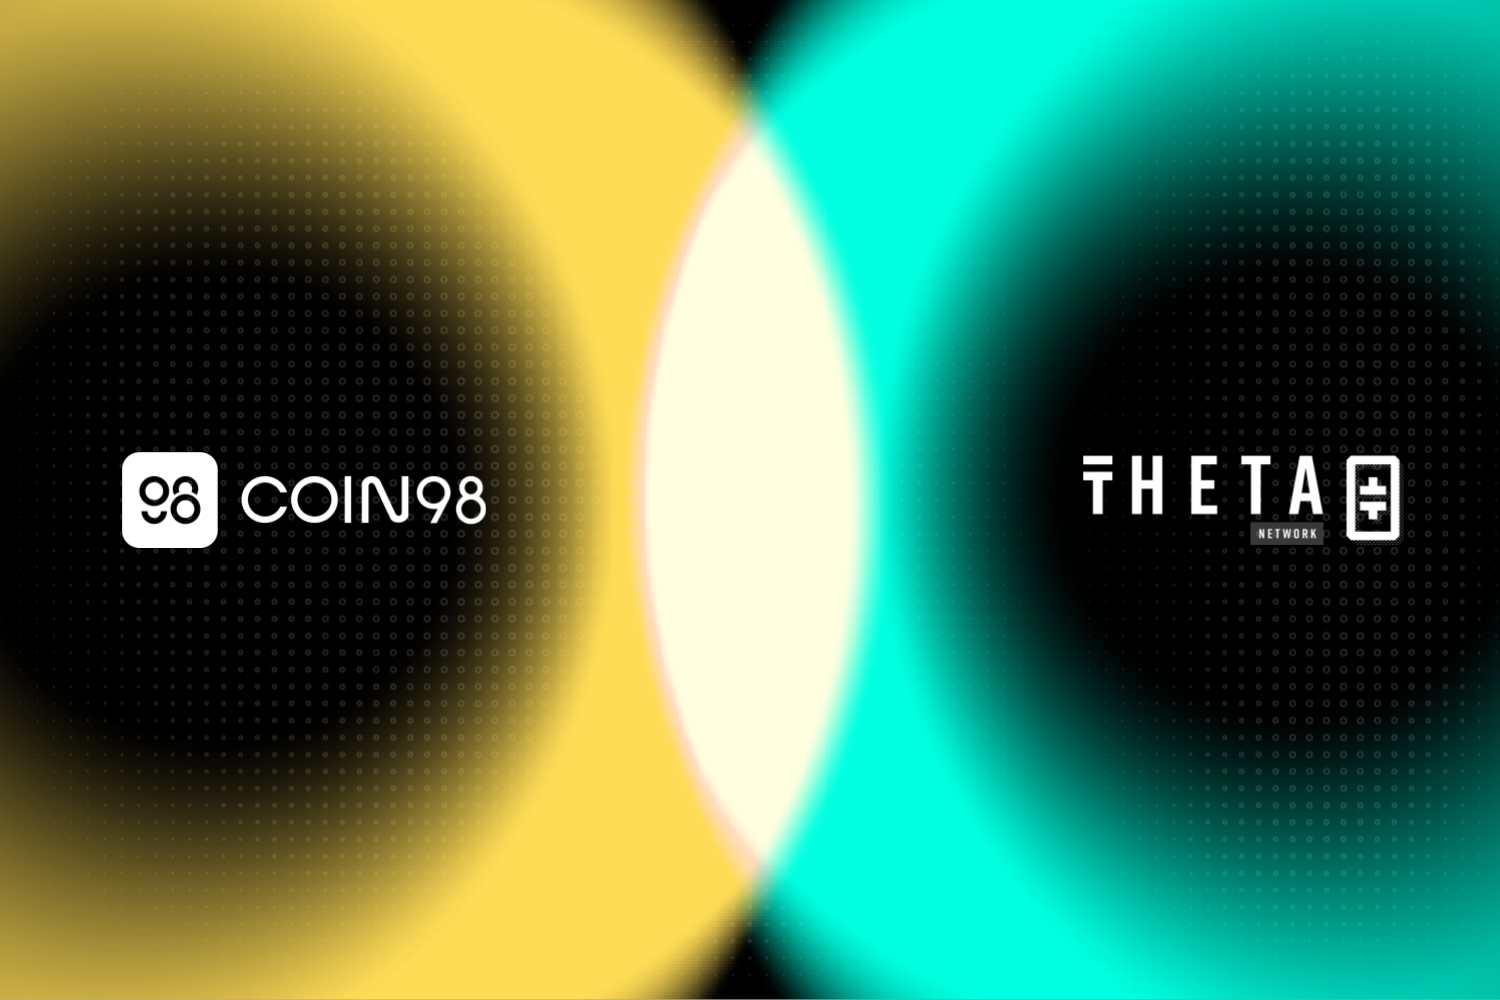 Coin98 now integrates Theta Network empowering users with the benefits of Web3 Businesses